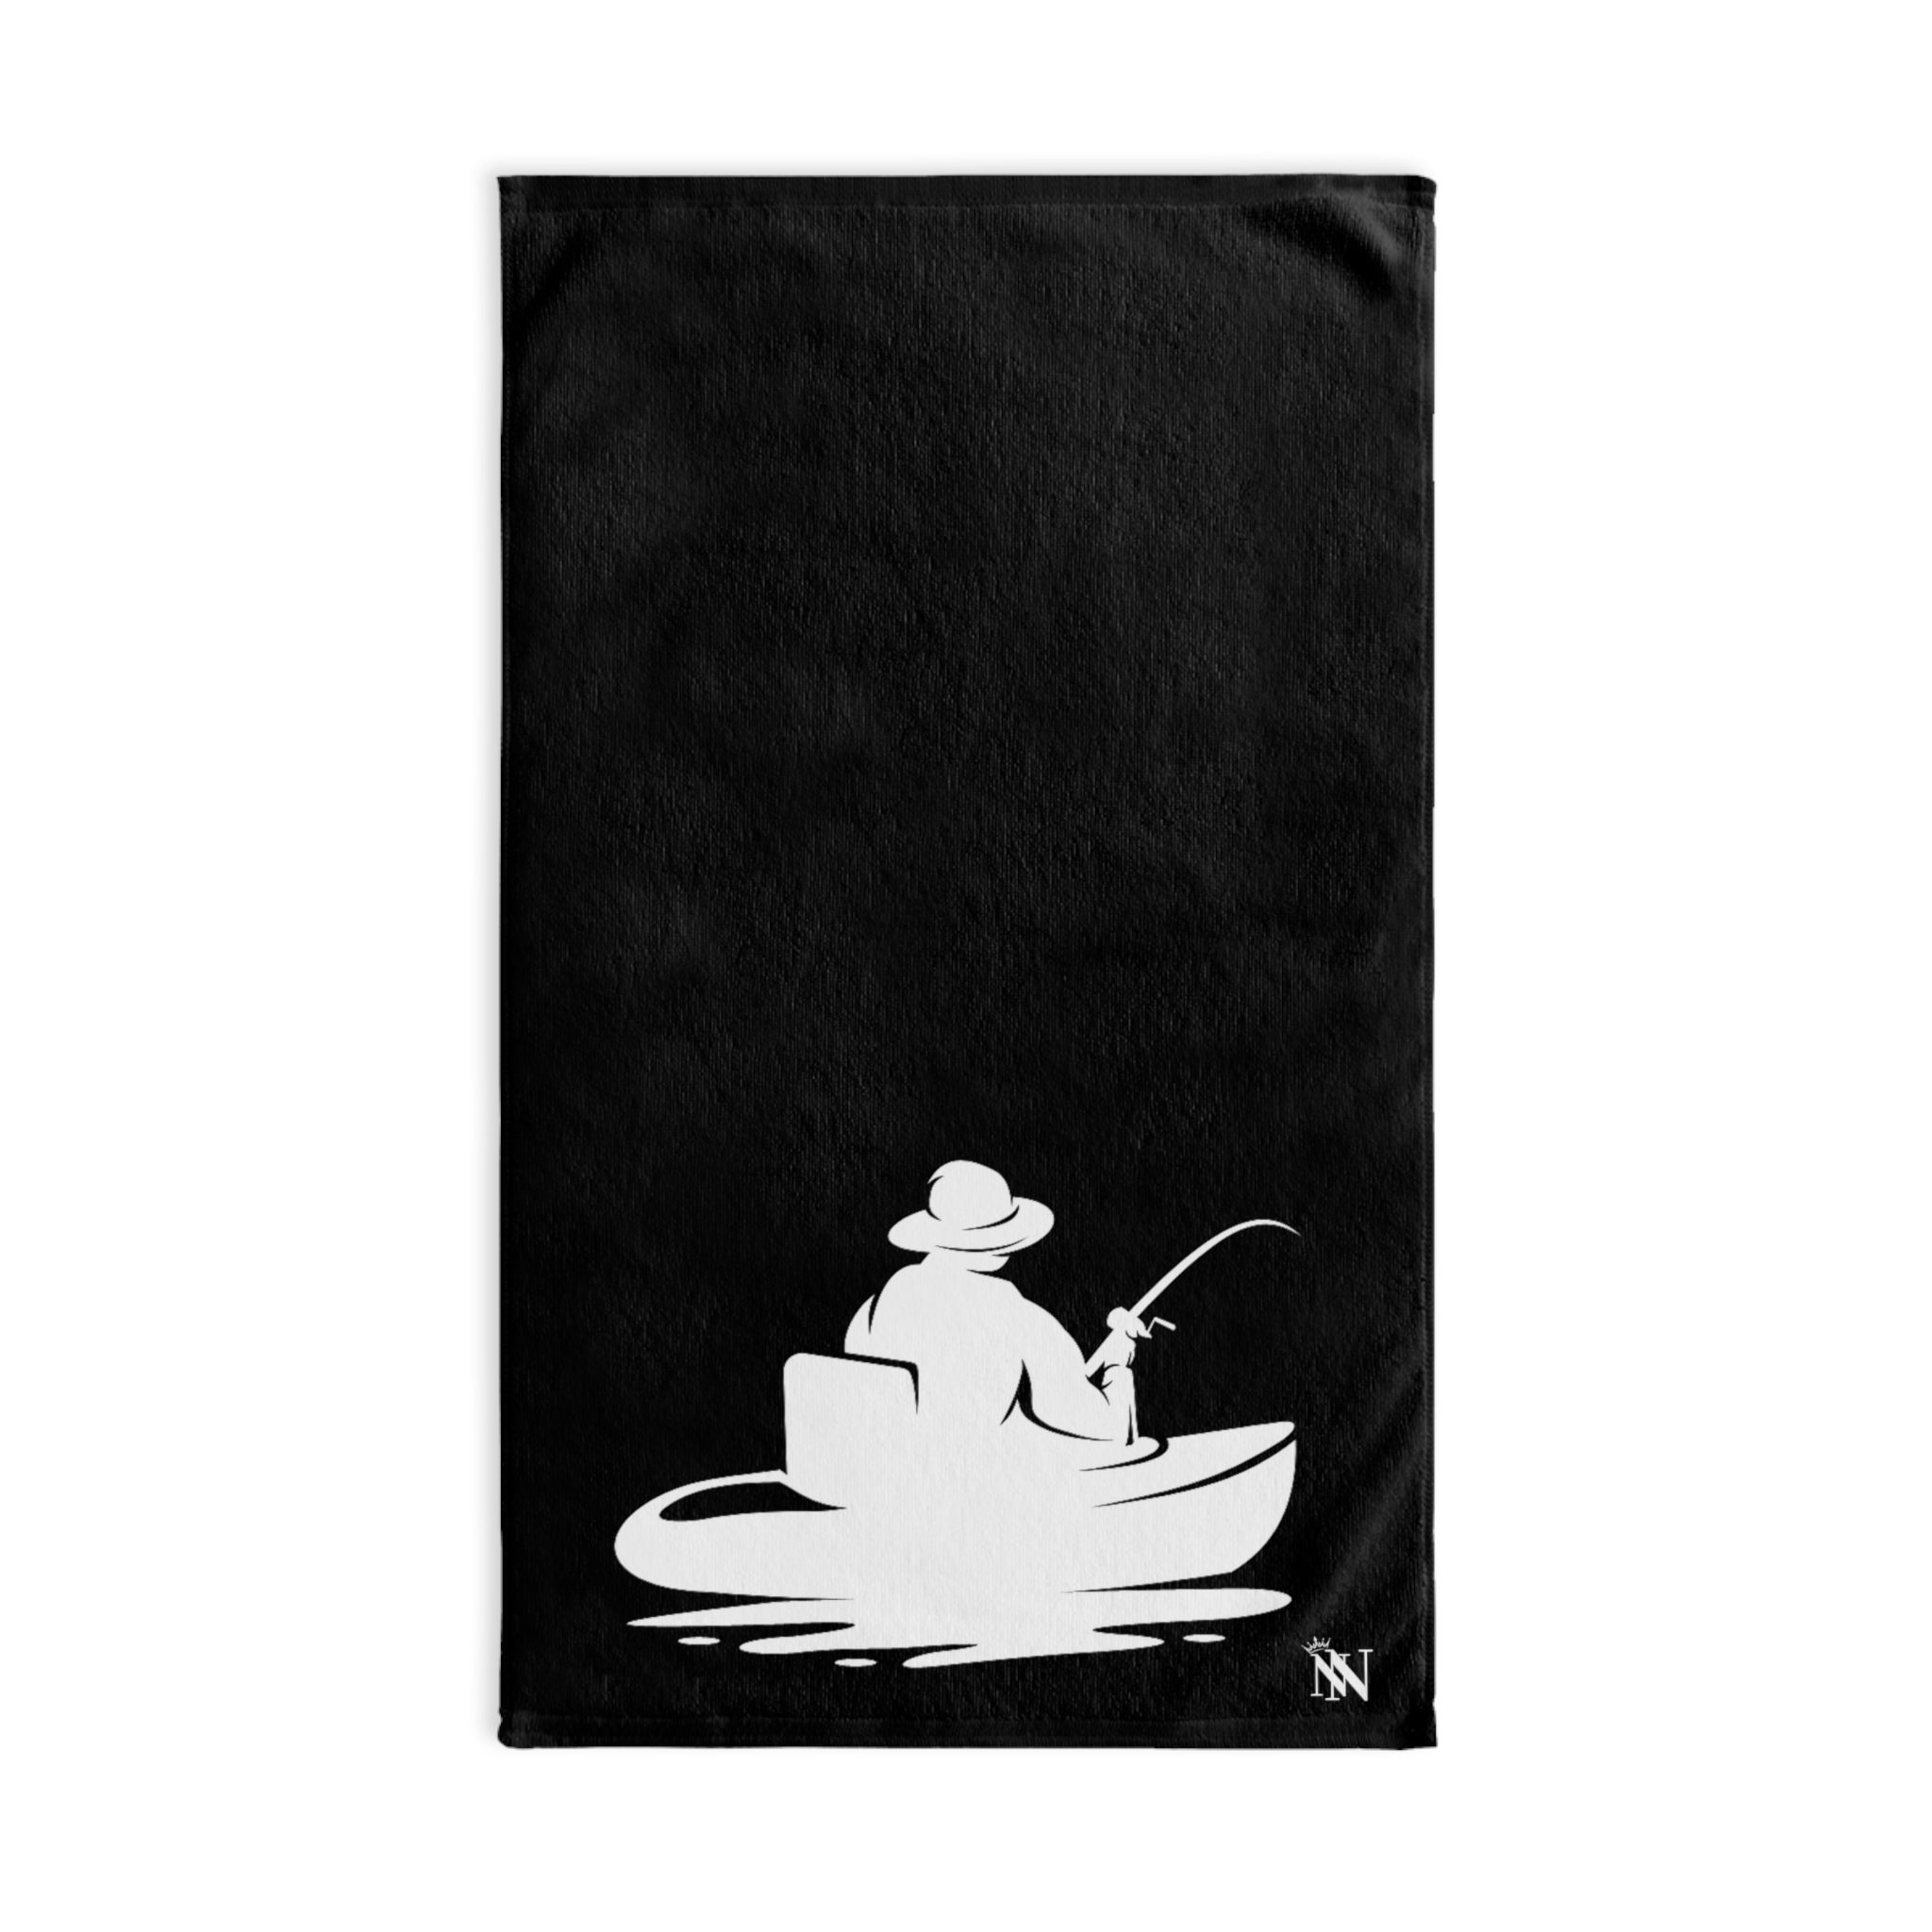 Boat Man FishBlack | Sexy Gifts for Boyfriend, Funny Towel Romantic Gift for Wedding Couple Fiance First Year 2nd Anniversary Valentines, Party Gag Gifts, Joke Humor Cloth for Husband Men BF NECTAR NAPKINS